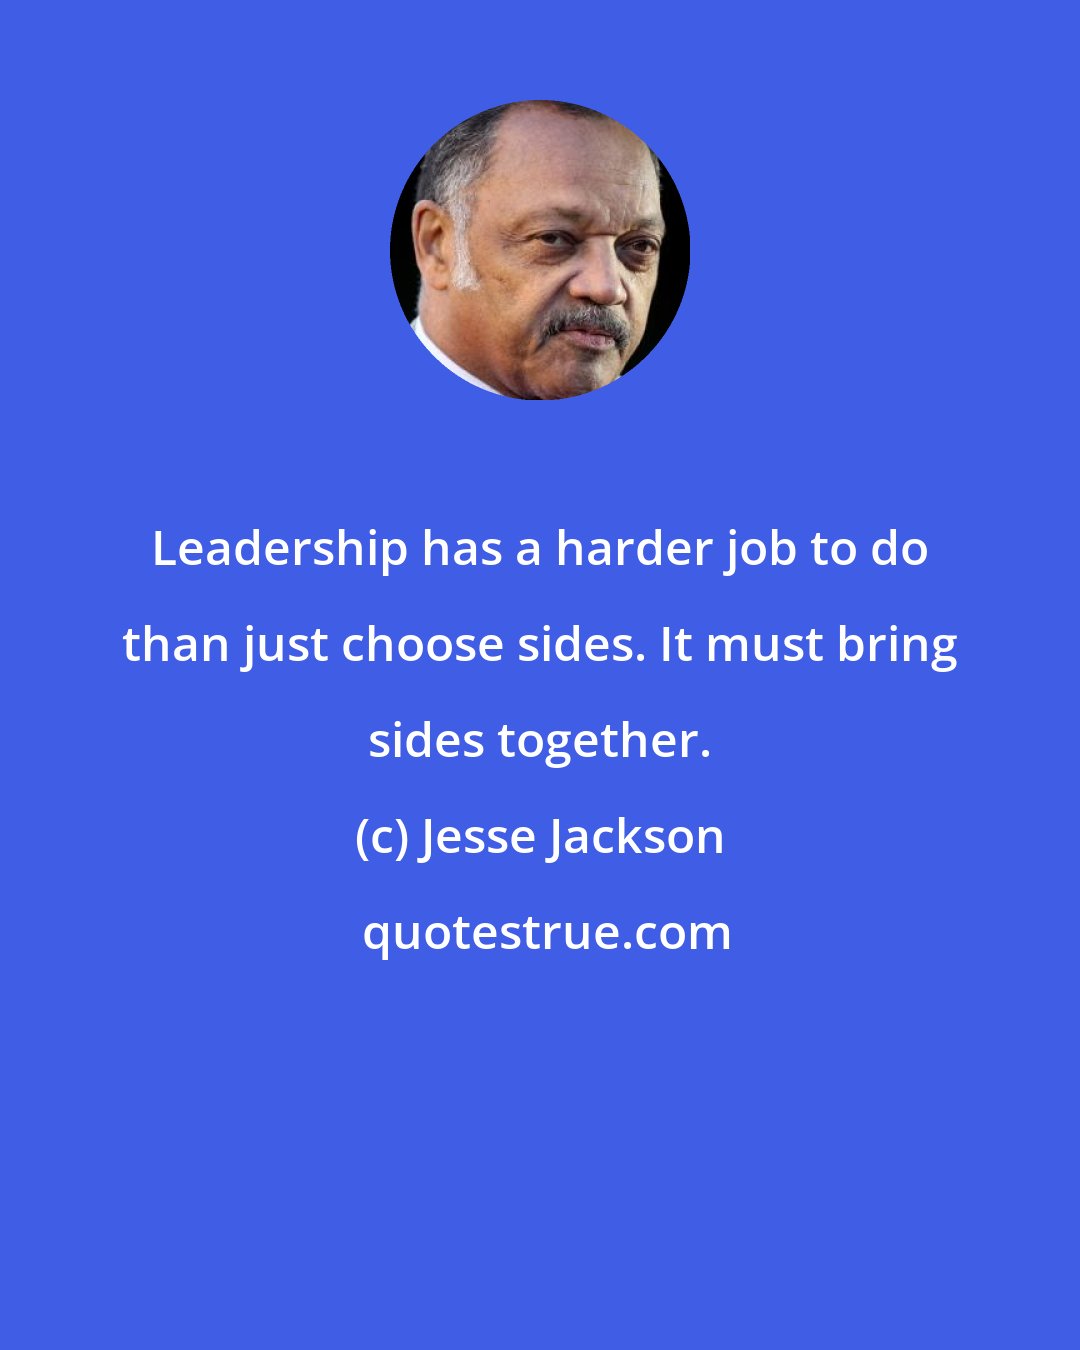 Jesse Jackson: Leadership has a harder job to do than just choose sides. It must bring sides together.